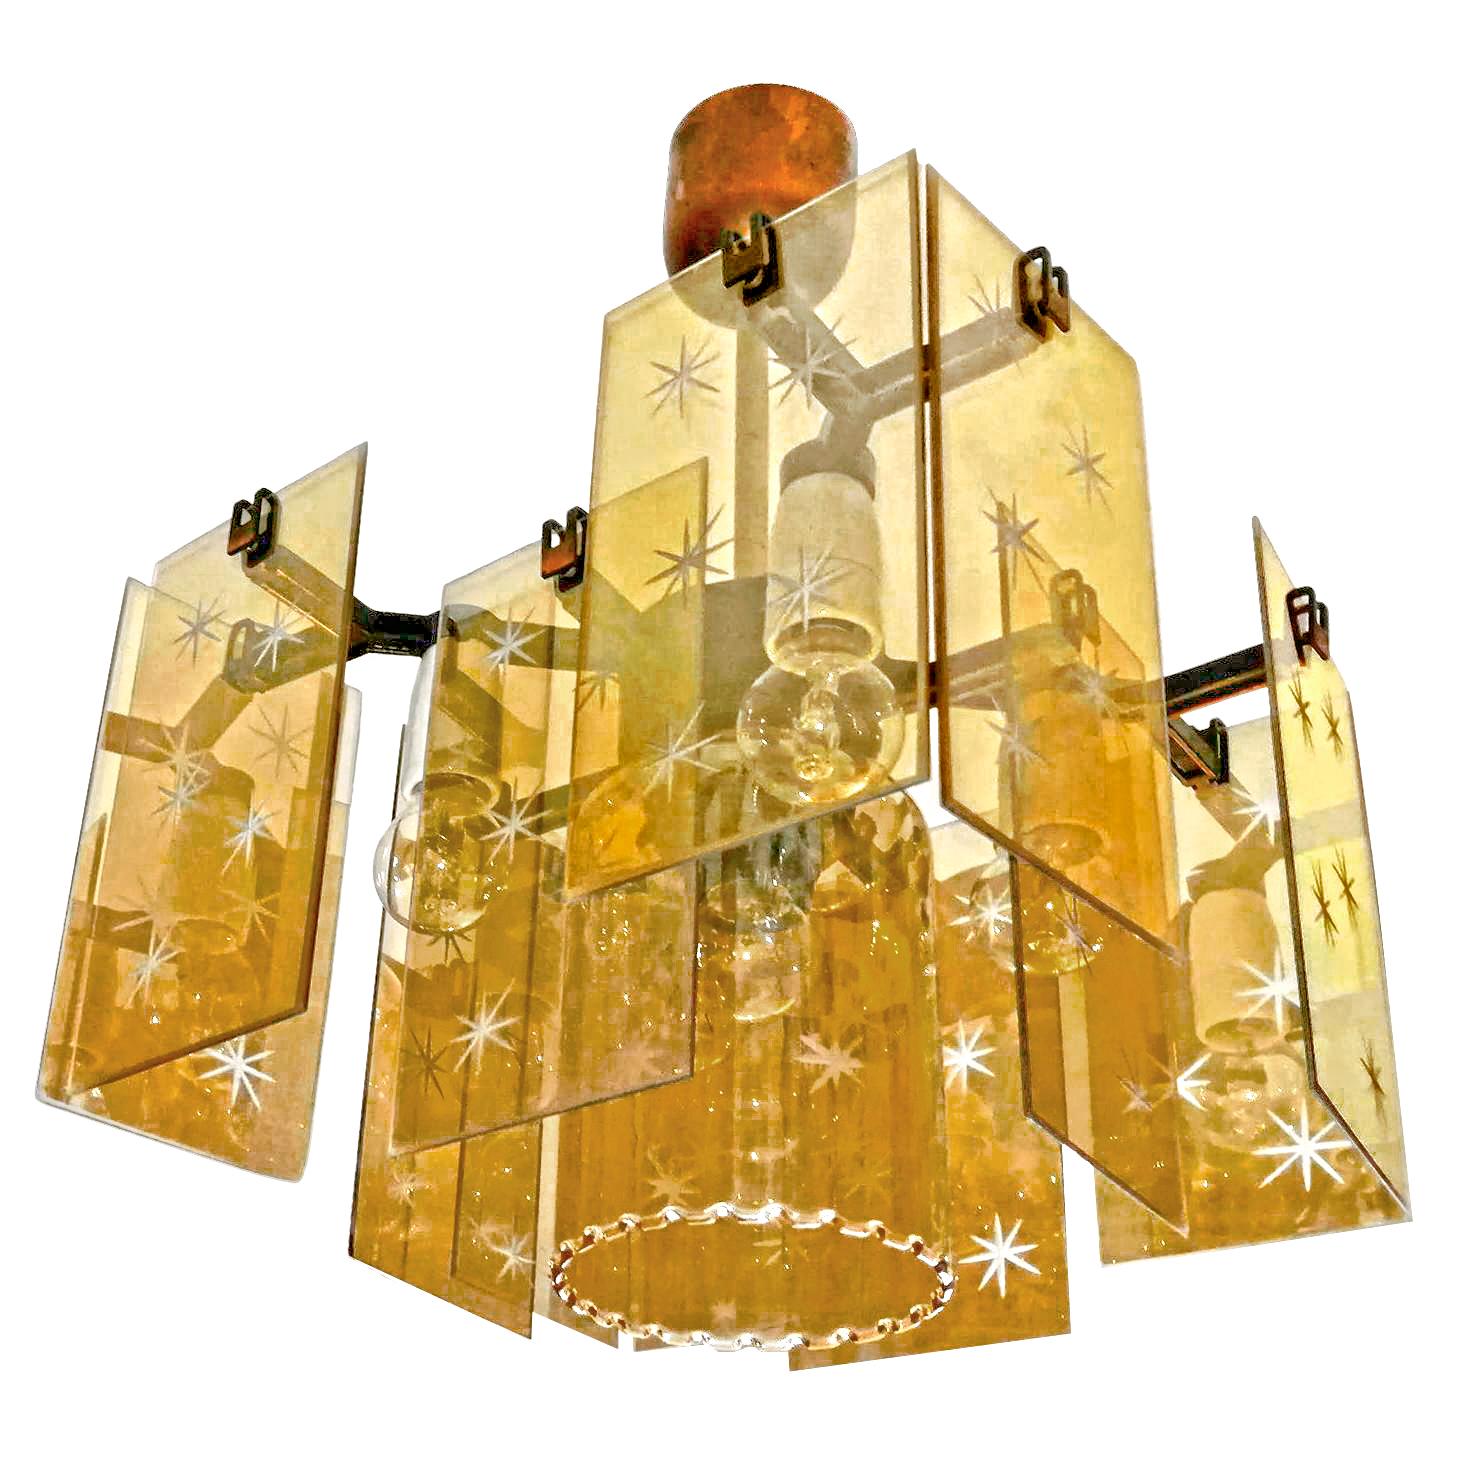 Gorgeous Italian modern Fontana Arte satellite chandelier with smoked amber gold wheel cut glass stars shades. Fabulous mirror effect. Brass with copper finish.
Dimensions:
Width 12.20 in / 31 cm
Diagonal 16,14 in / 41 cm
Height 19.29 in / 49